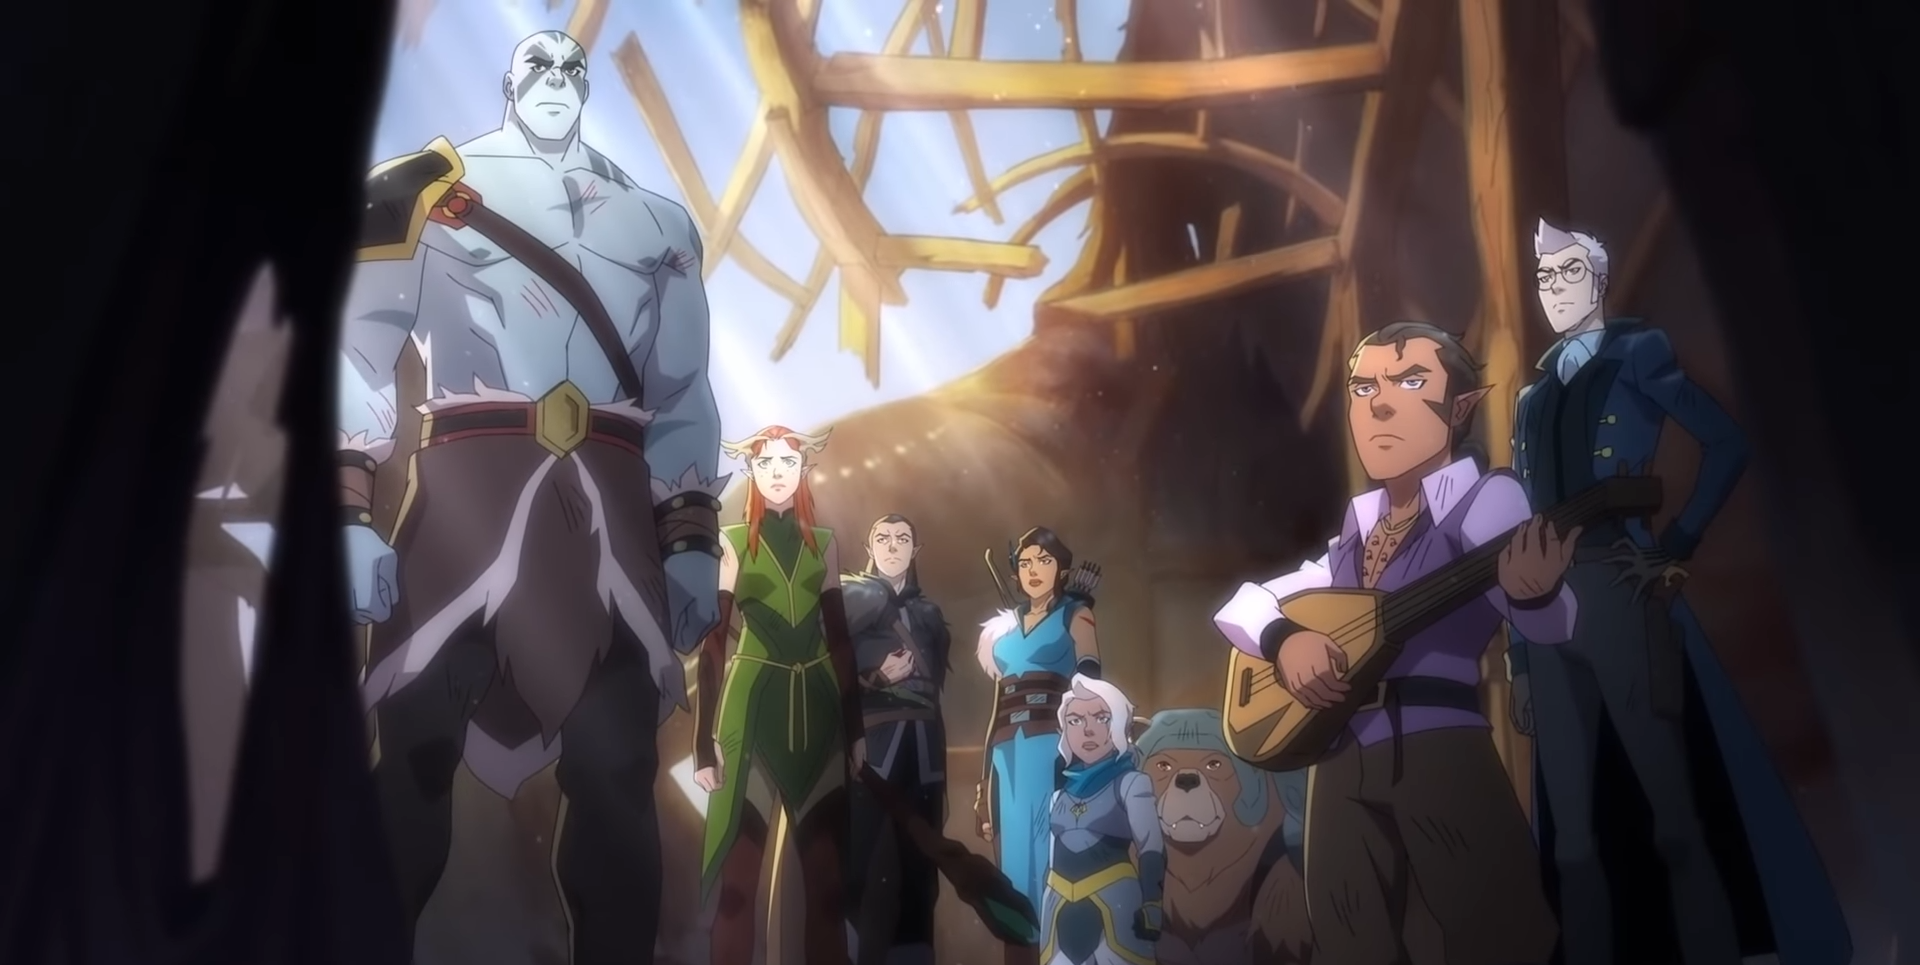 New Trailer For 'The Legend Of Vox Machina' Is Out As The Show Premieres Soon